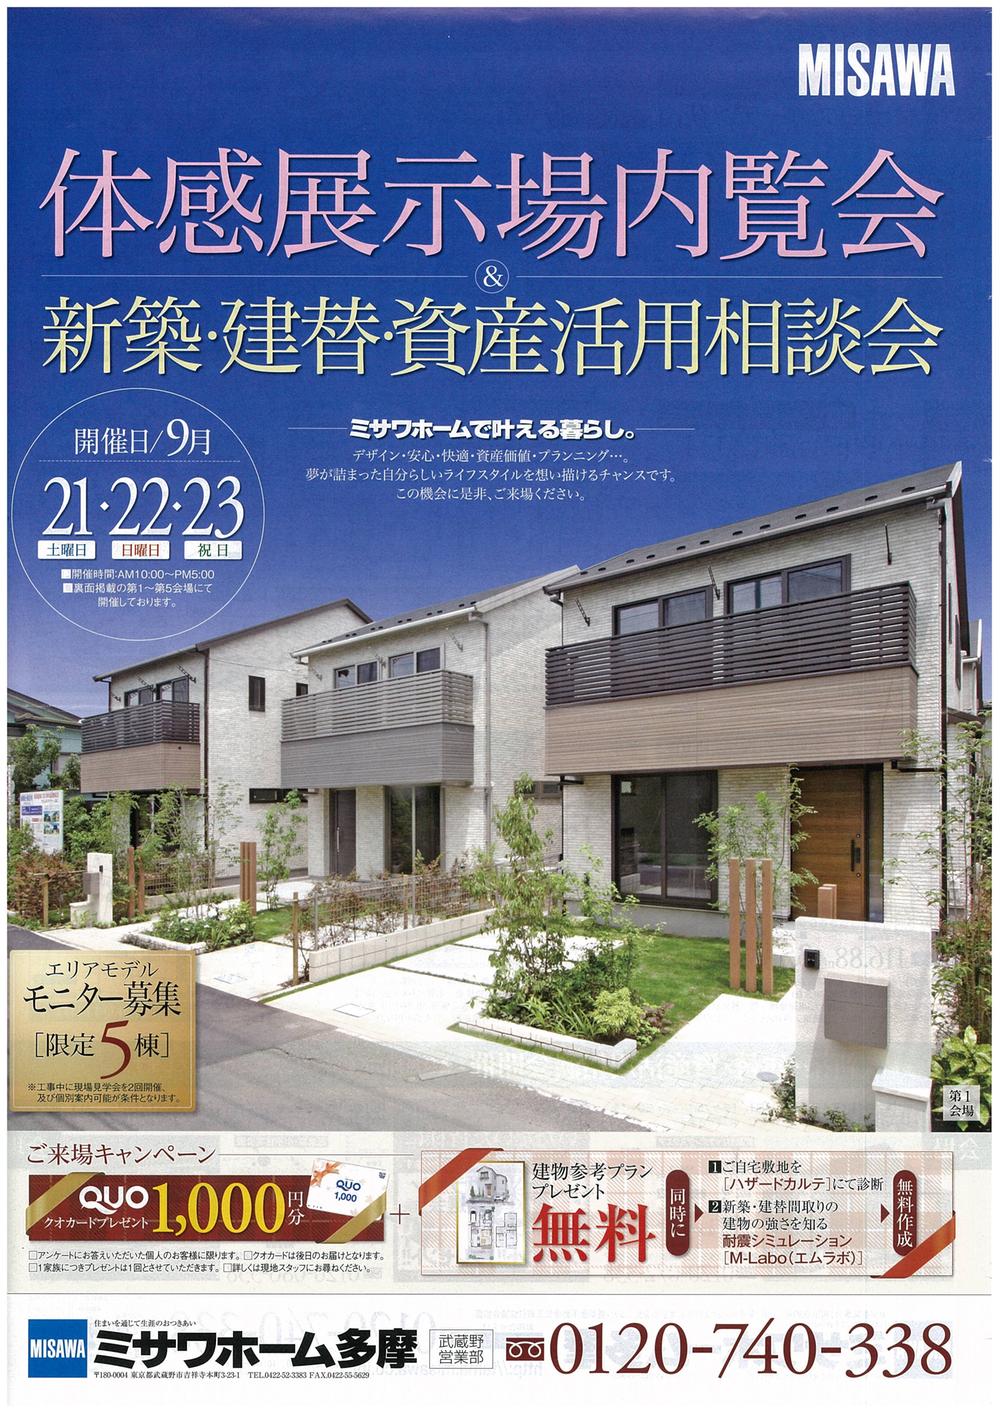 Present. New construction ・ Reconstruction ・ Asset utilization also please consult. , Please visit also as a model house of realistic size. 